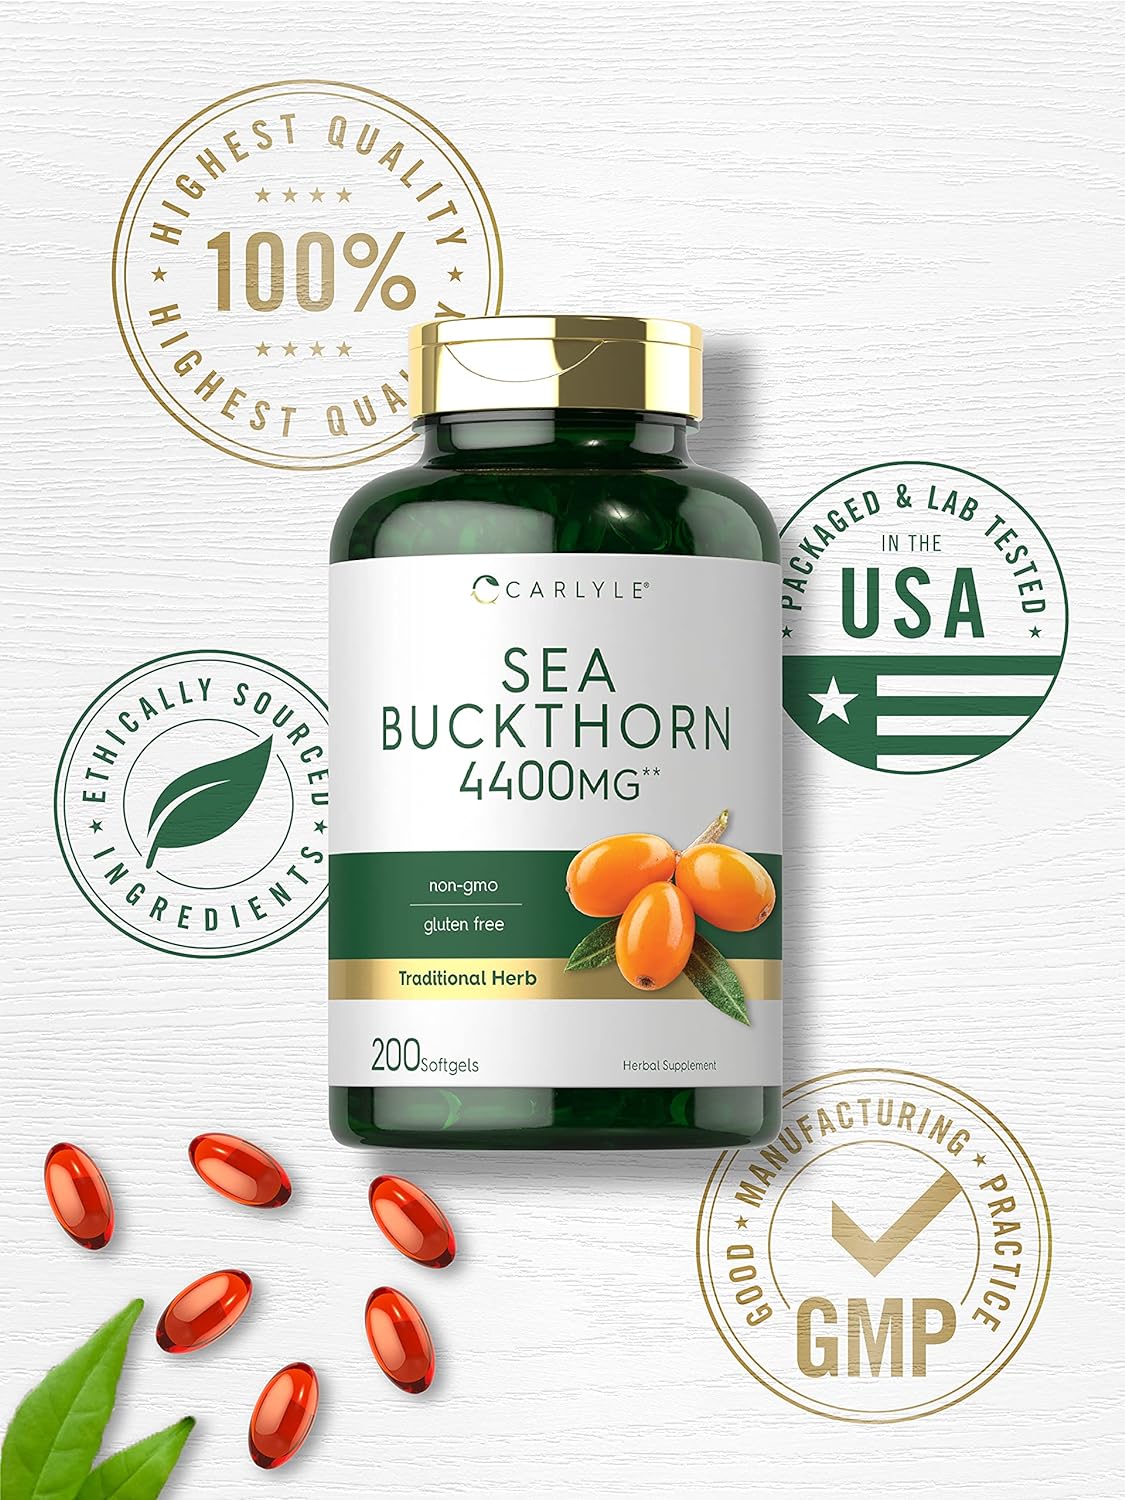 Carlyle Sea Buckthorn Oil Capsules 4400mg | 200 Softgels | Non-GMO, Gluten Free | Sea Buckthorn Berry Oil Supplement : Health & Household